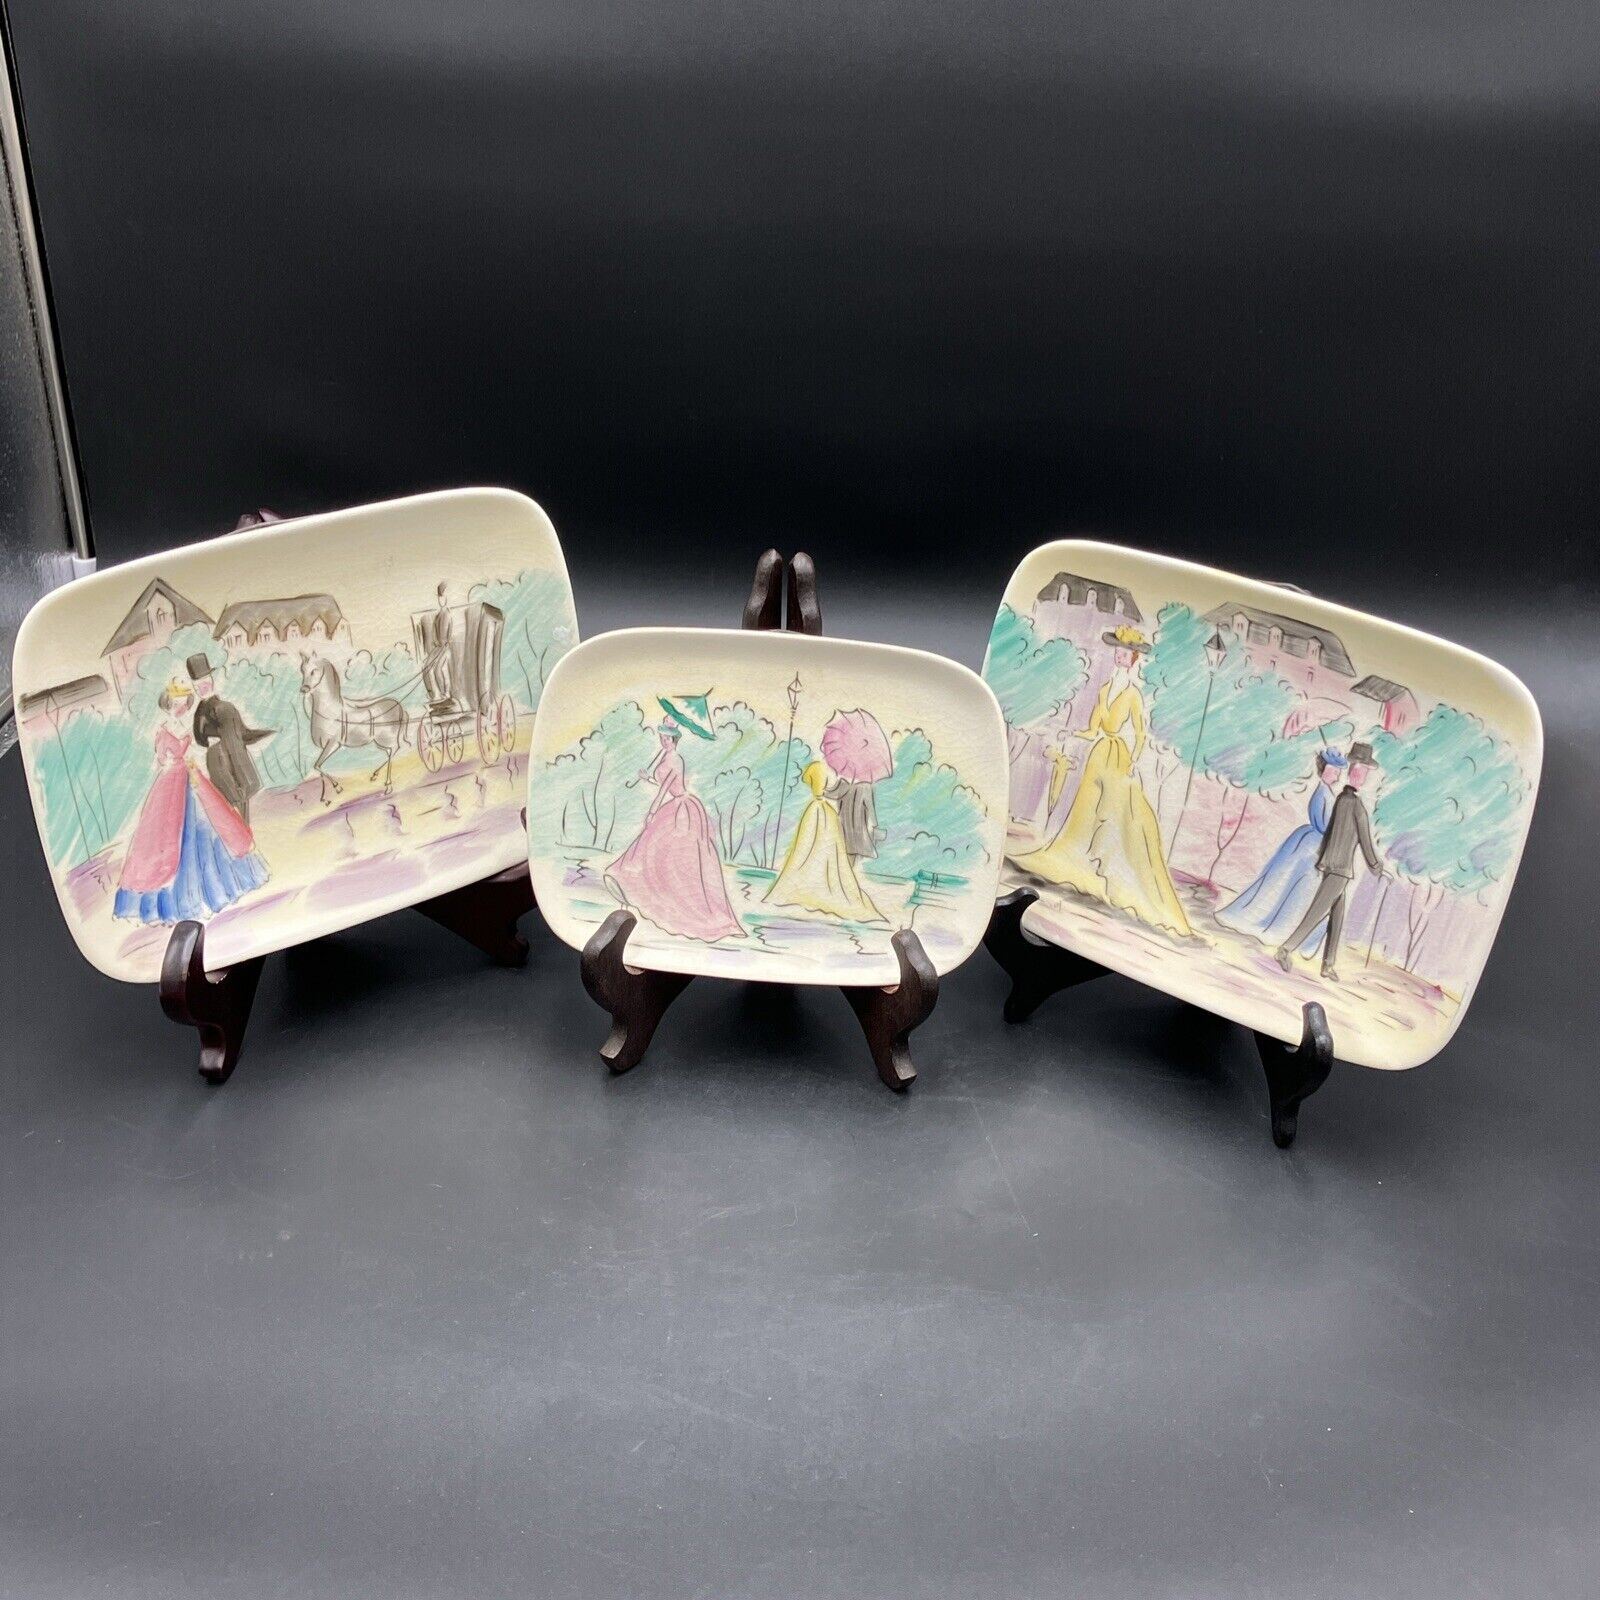 3 Vintage Ucagco Wall hanging Plates 1950’s Colonial Park Scene Hand Painted